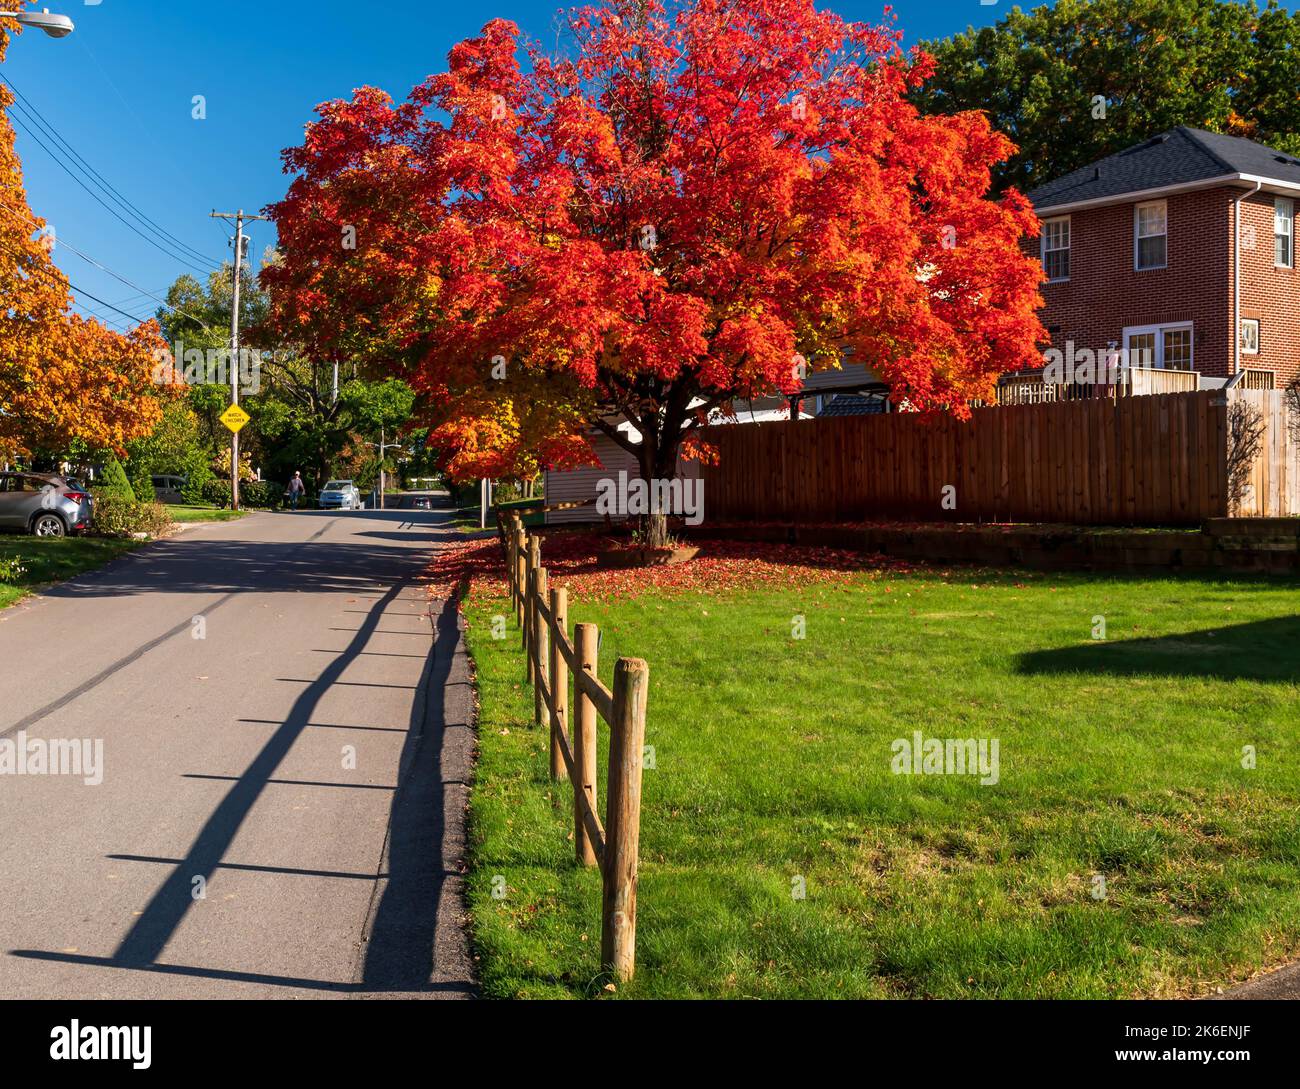 Beautiful red leaves on an oak tree in the Swisshelm Park neighborhood in Pittsburgh, Pennsylvania, USA Stock Photo